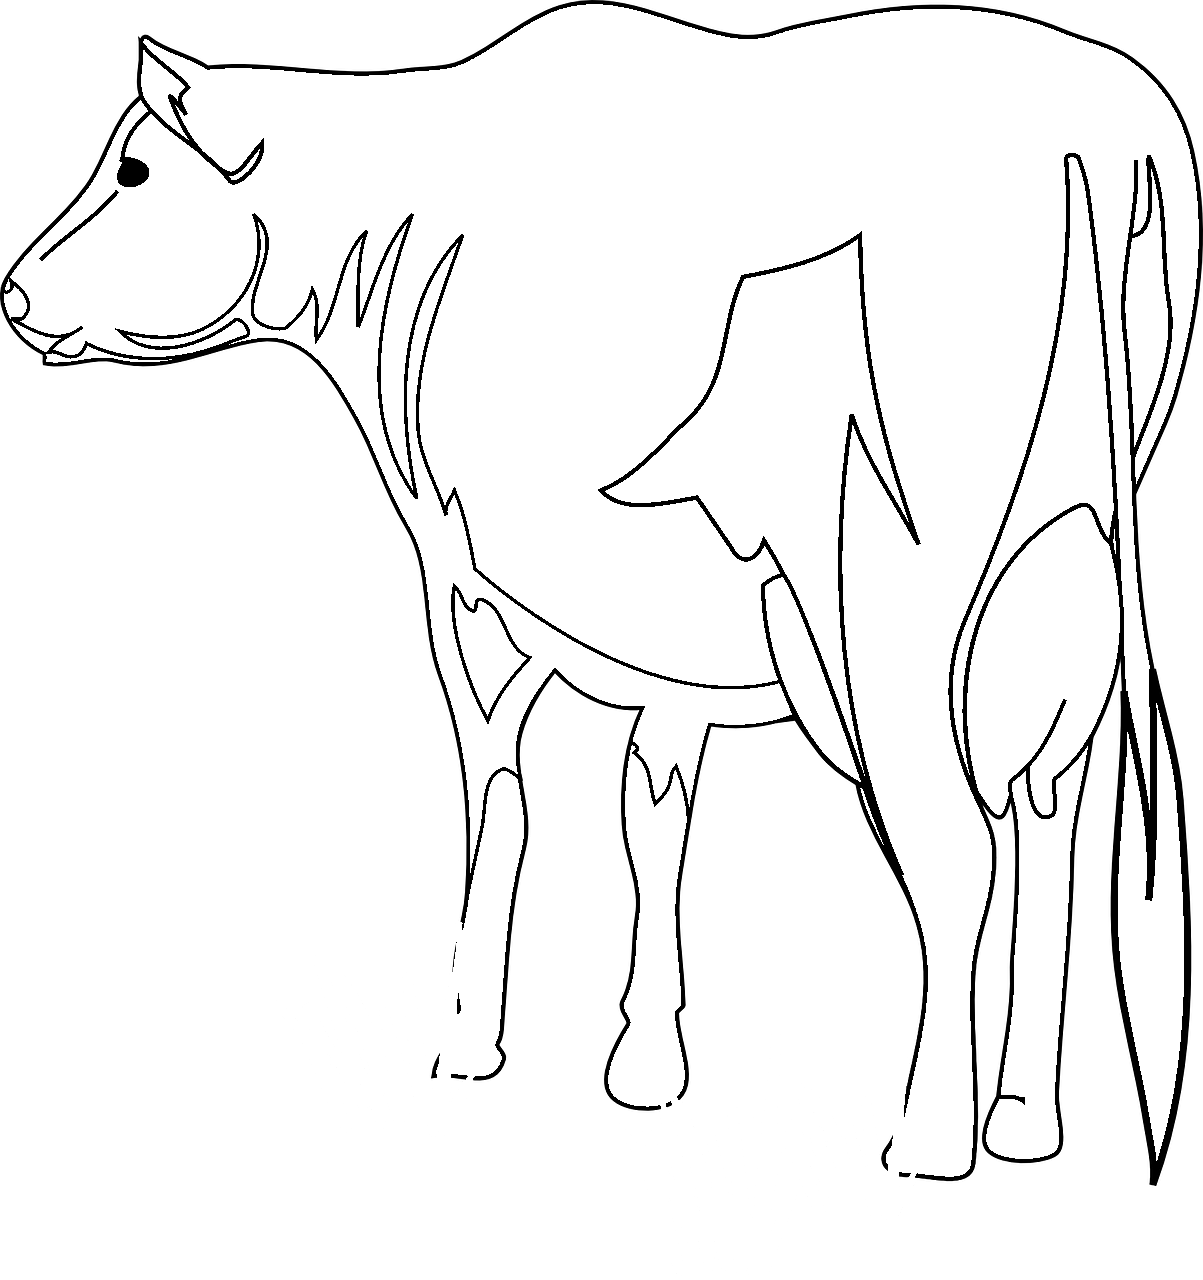 Cow back view coloring page